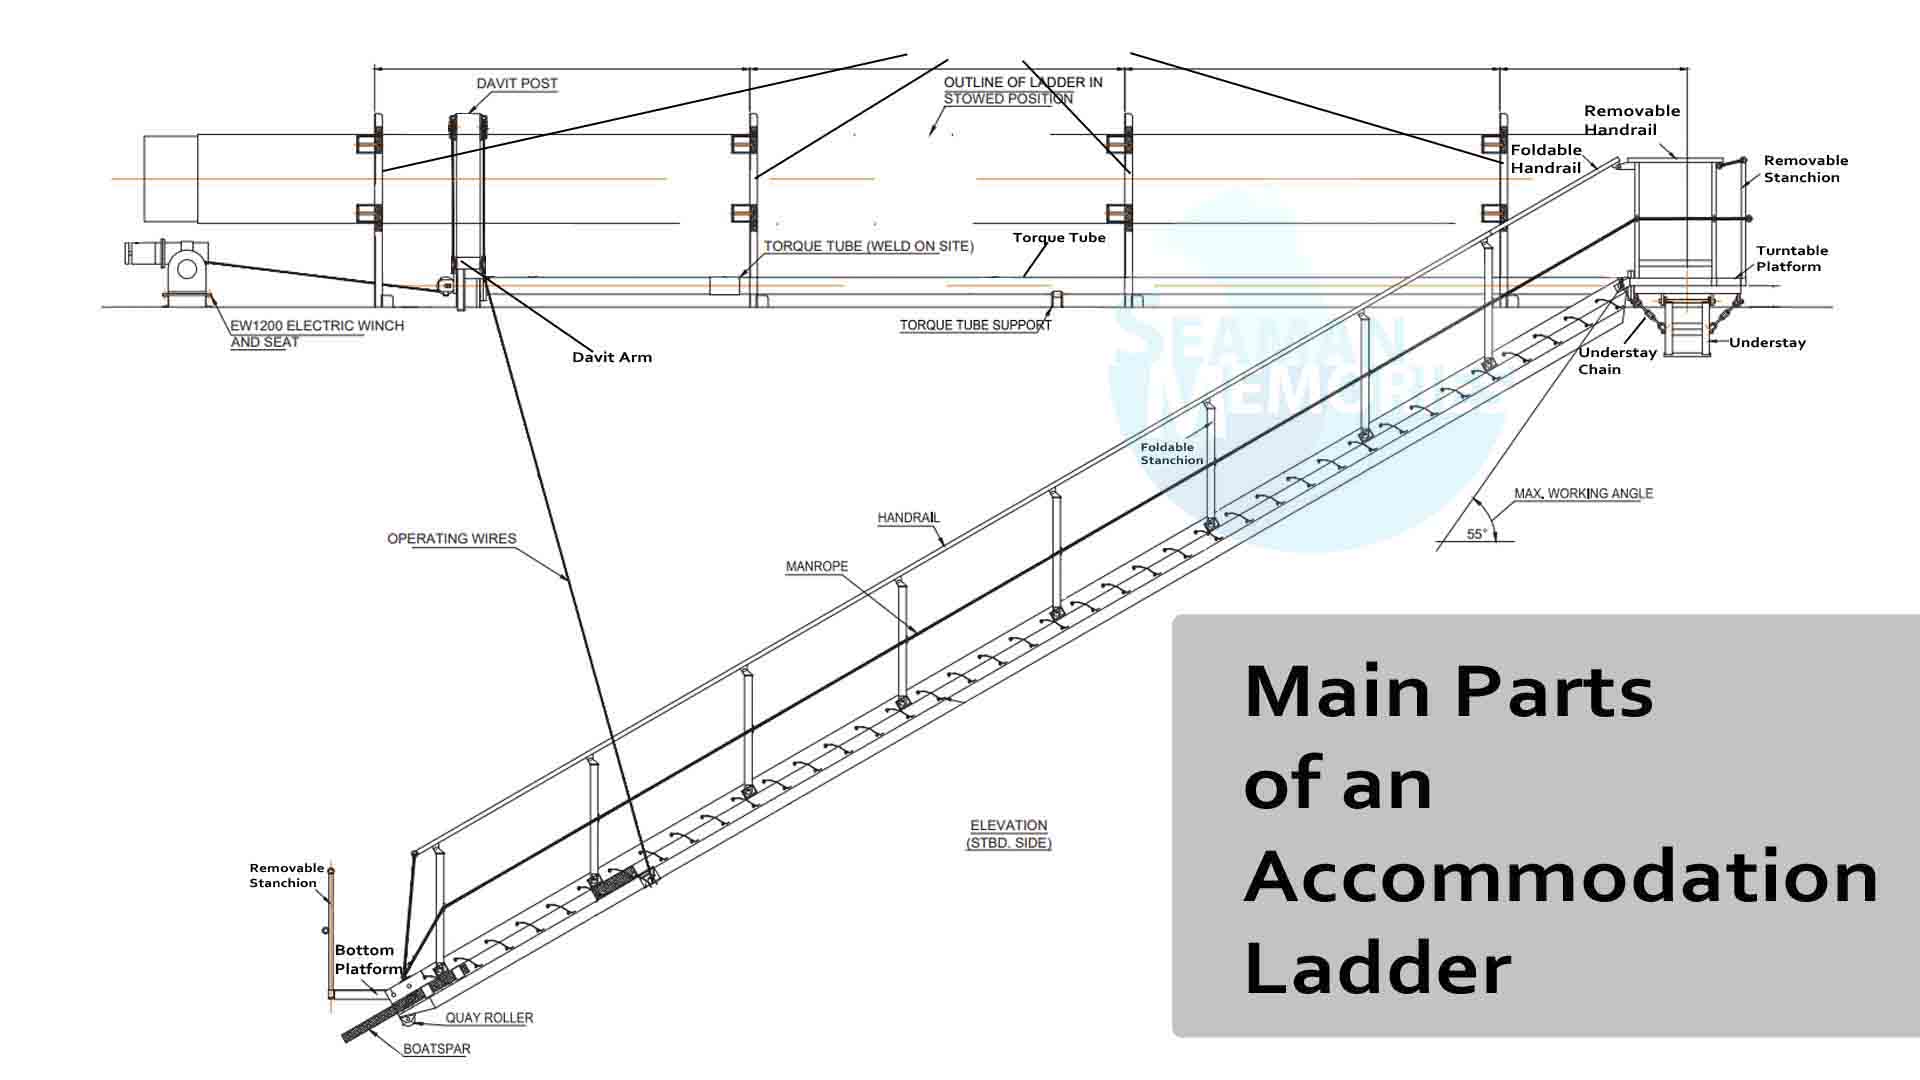 Schematic Diagram on the Main Parts of an Accommodation Ladder